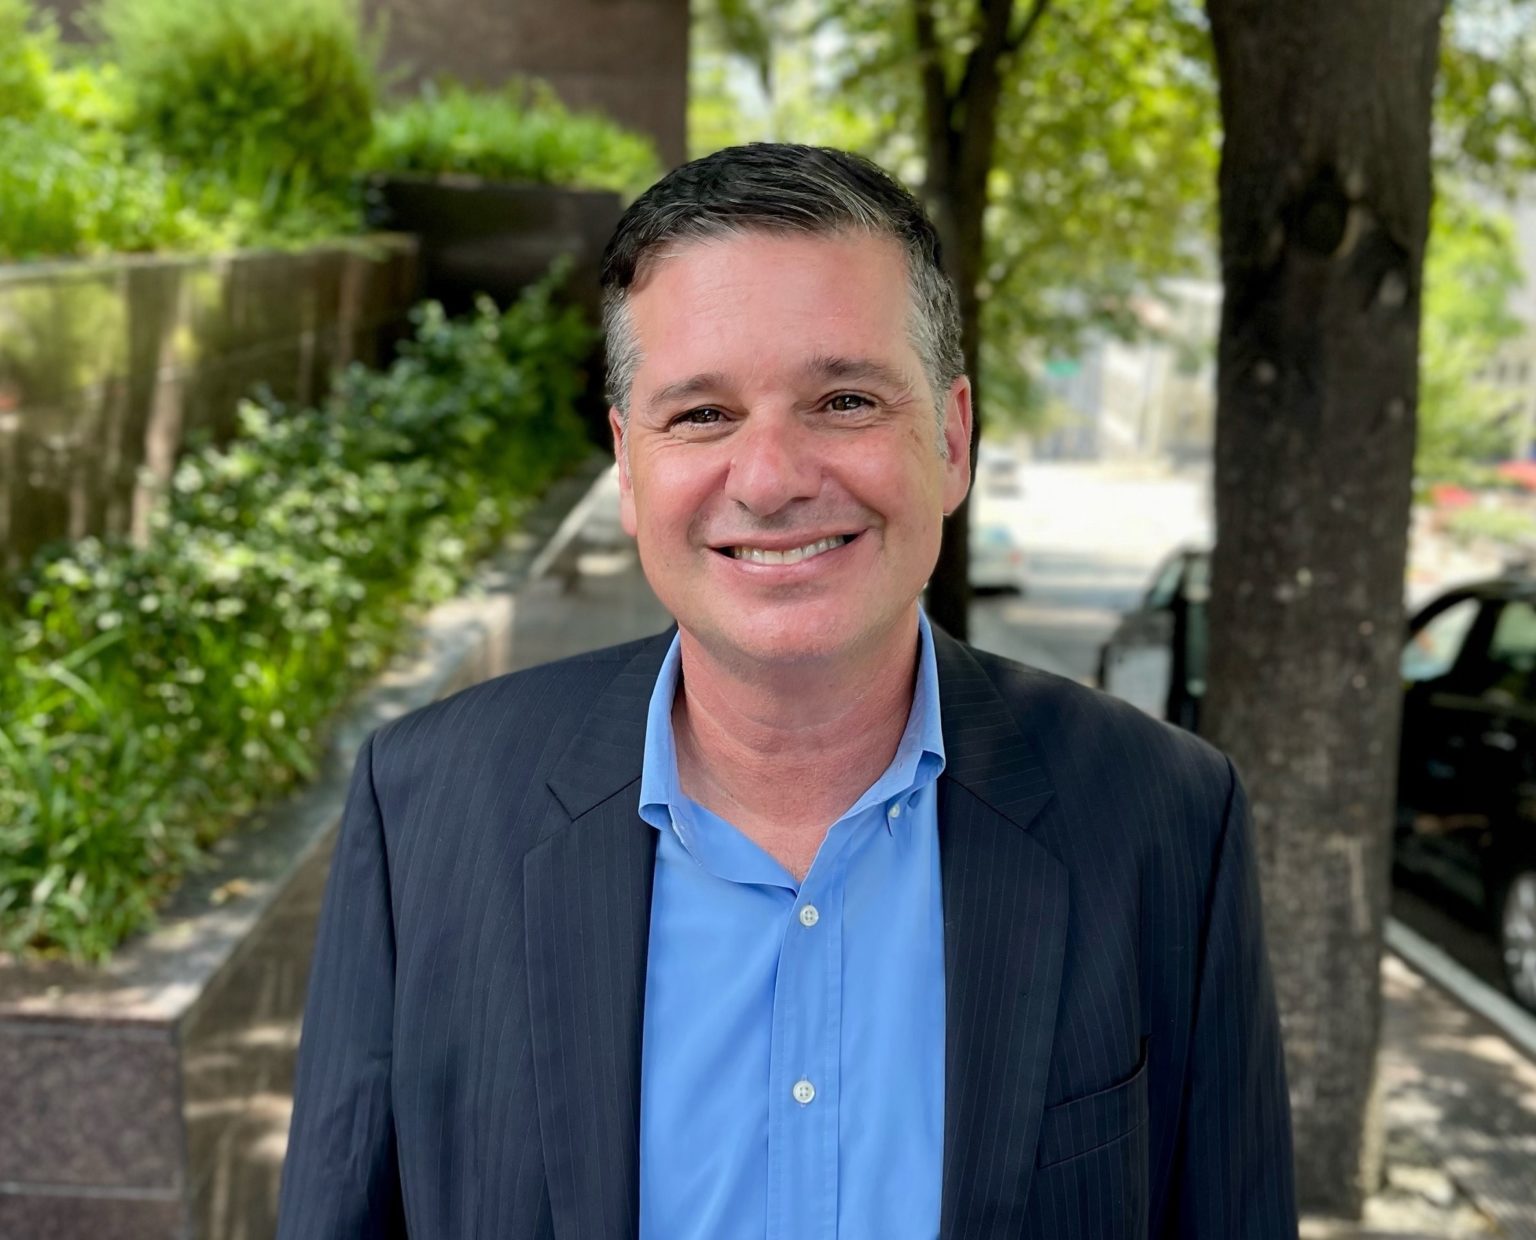 Photo of SDOT Director Greg Spotts smiling at the camera on a sunny day. Bushes and trees, as well as parked cars, are in the background. Greg is wearing a navy blue suit jacket and a blue dress shirt.